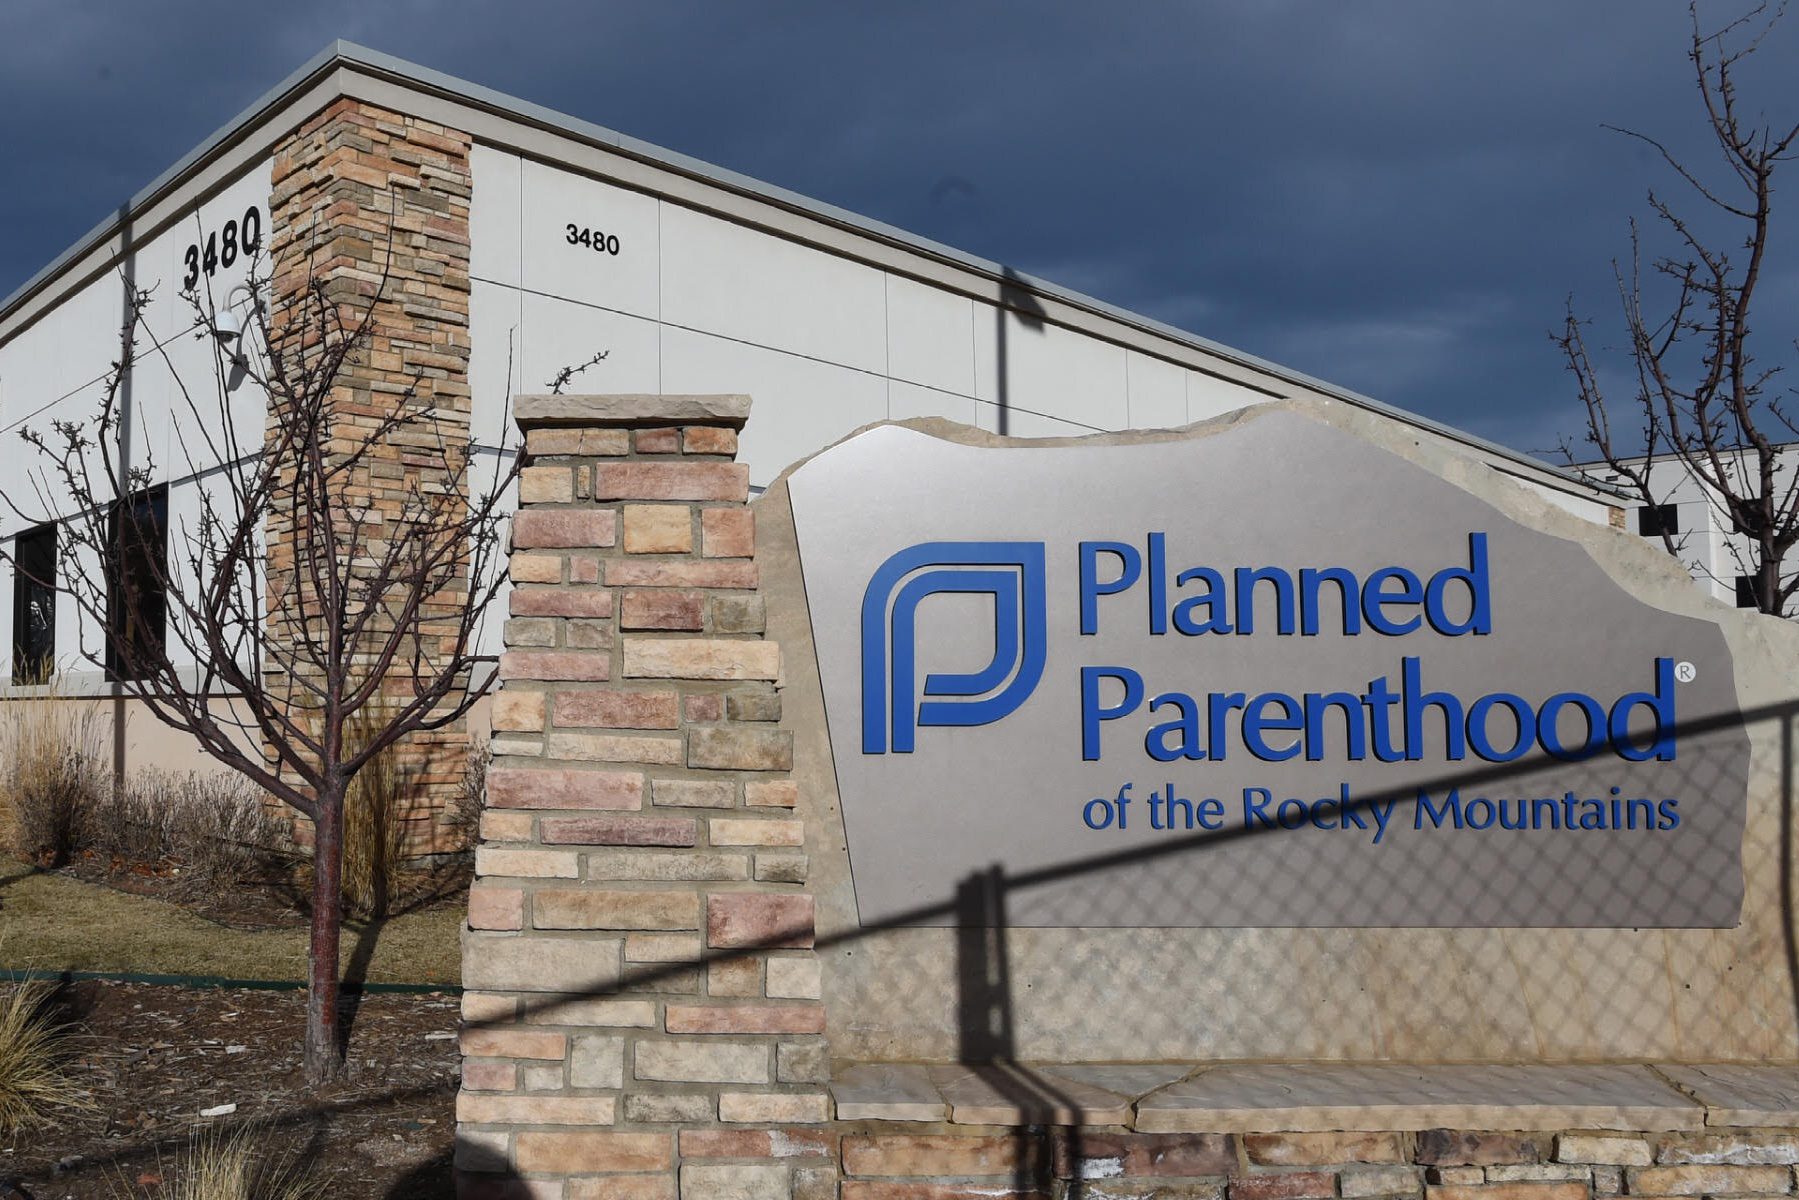 A shadow from a chain link fence falls across the Planned Parenthood of the Rocky Mountains sign.